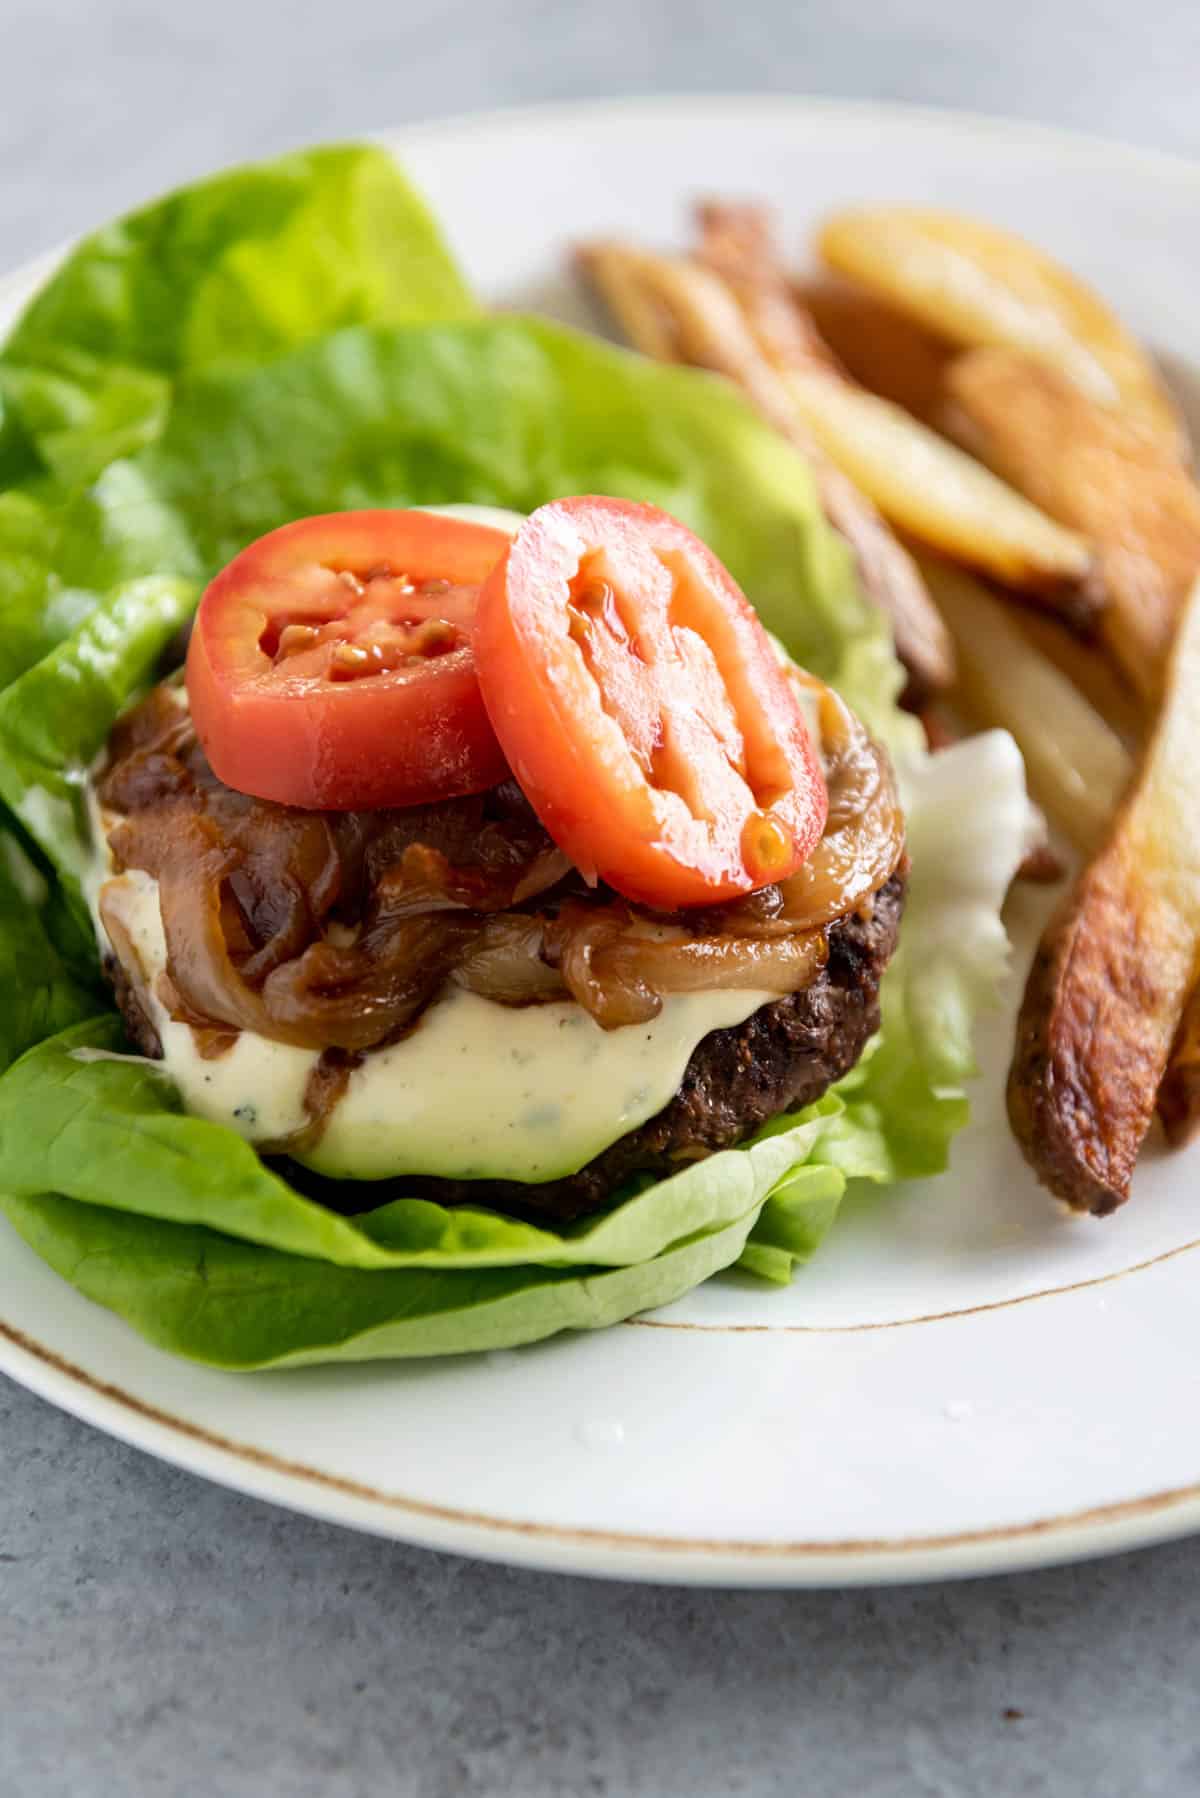 A burger and fries on a plate and the burger is topped with aioli as an example of how you can use it.